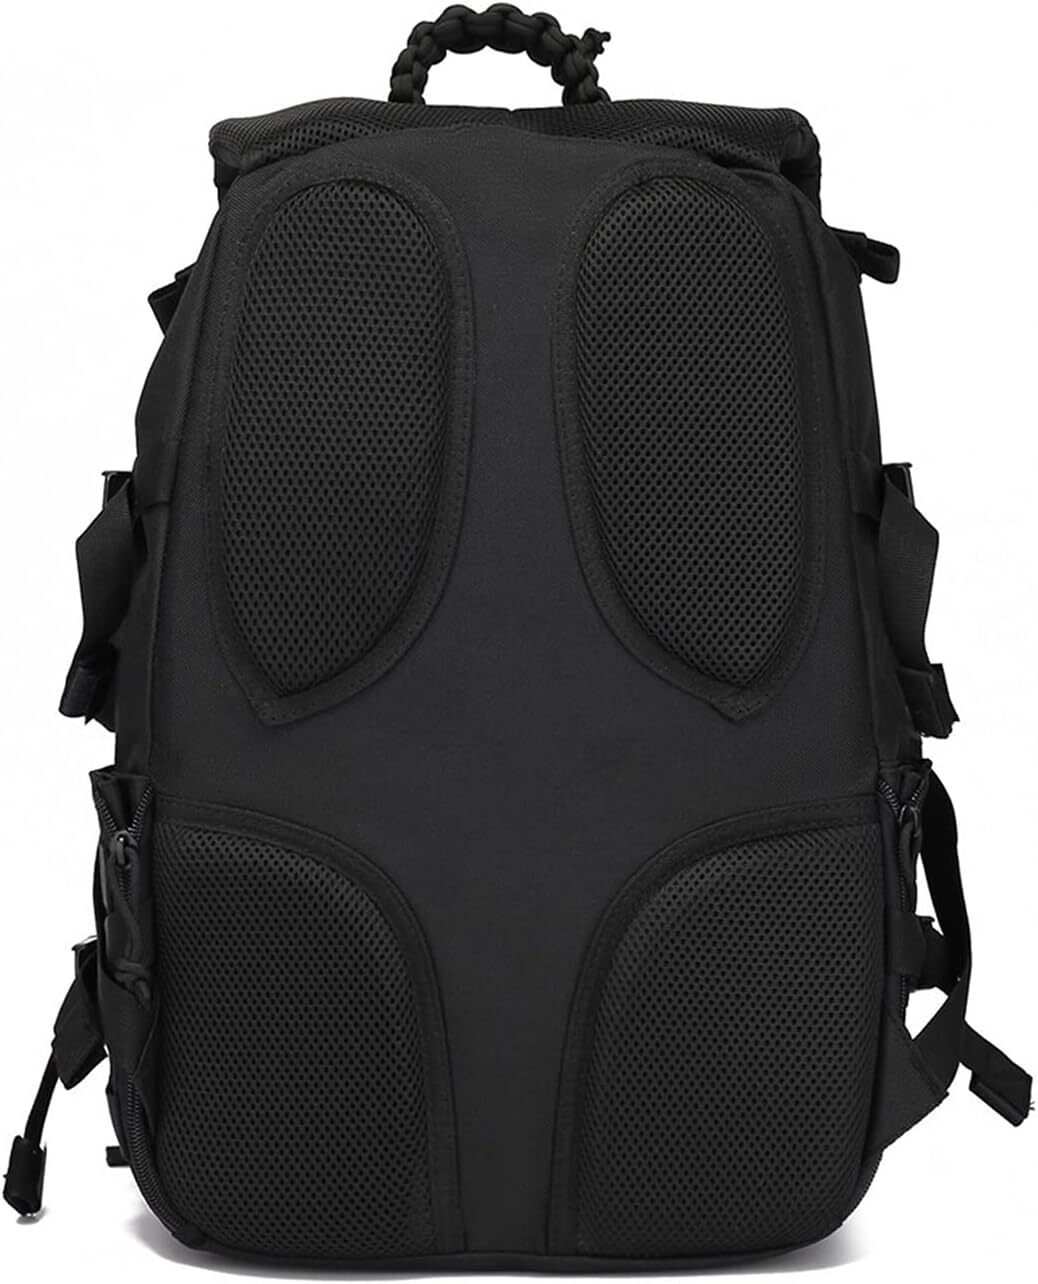 Xiaomi Military Camping Backpack 35L